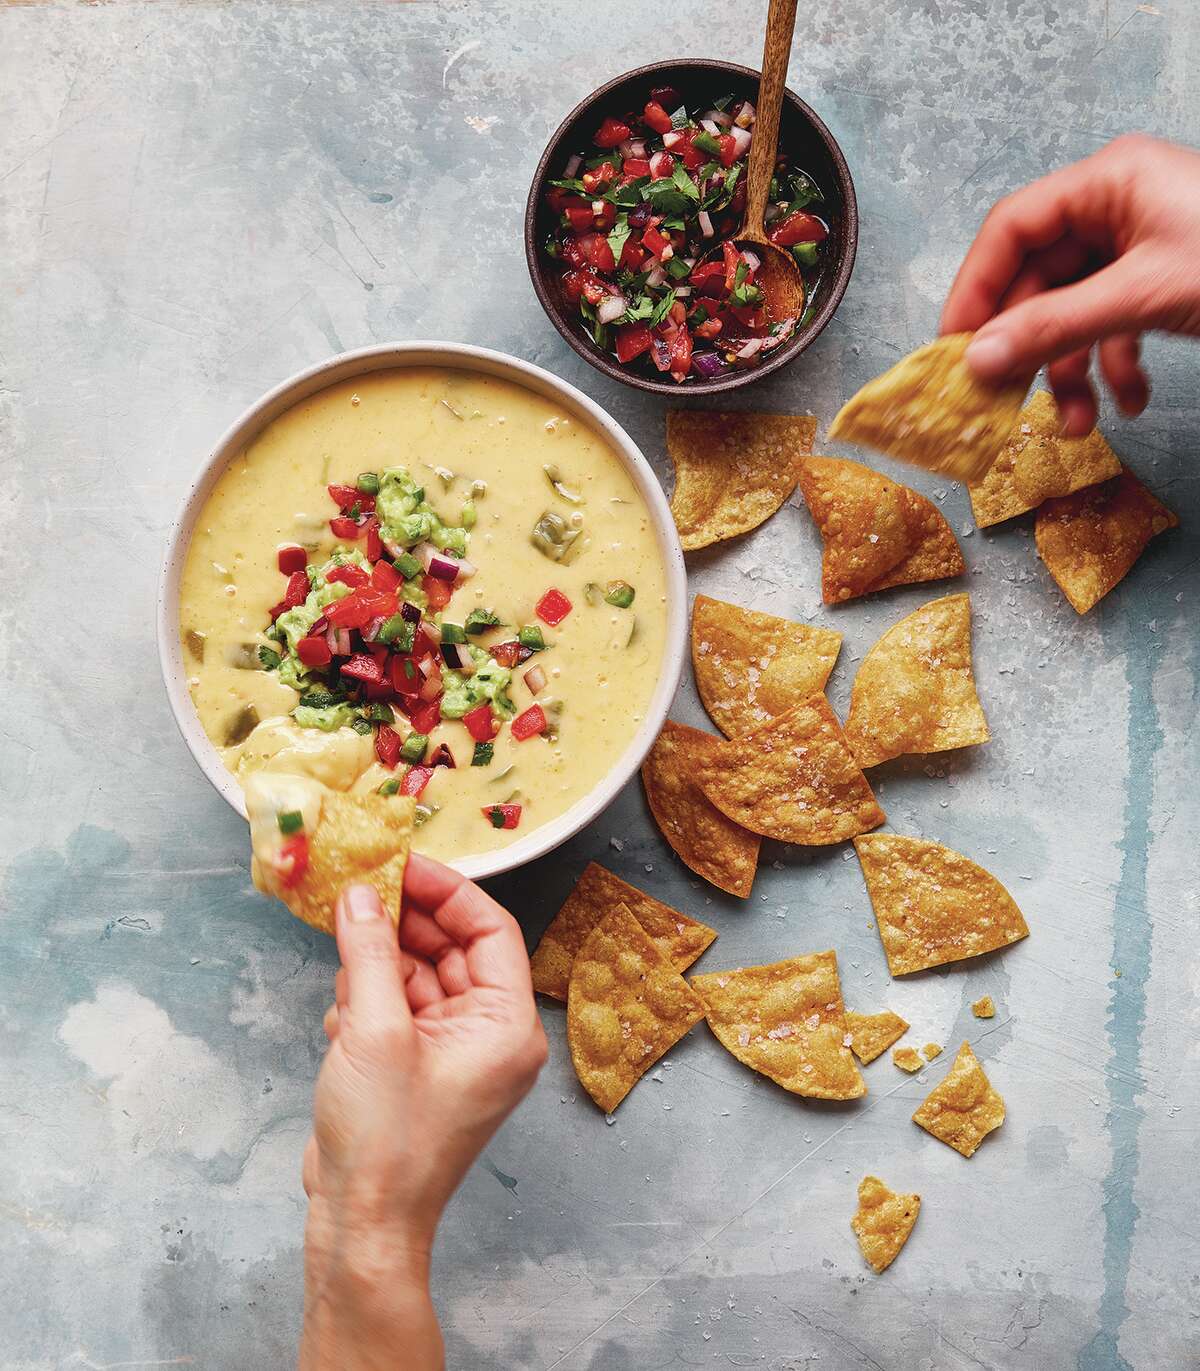 Austin Diner Style Queso from  "Queso! Regional Recipes for the World's Favorite Chile-Cheese Dip" by Lisa Fain (Ten Speed Press, $15).